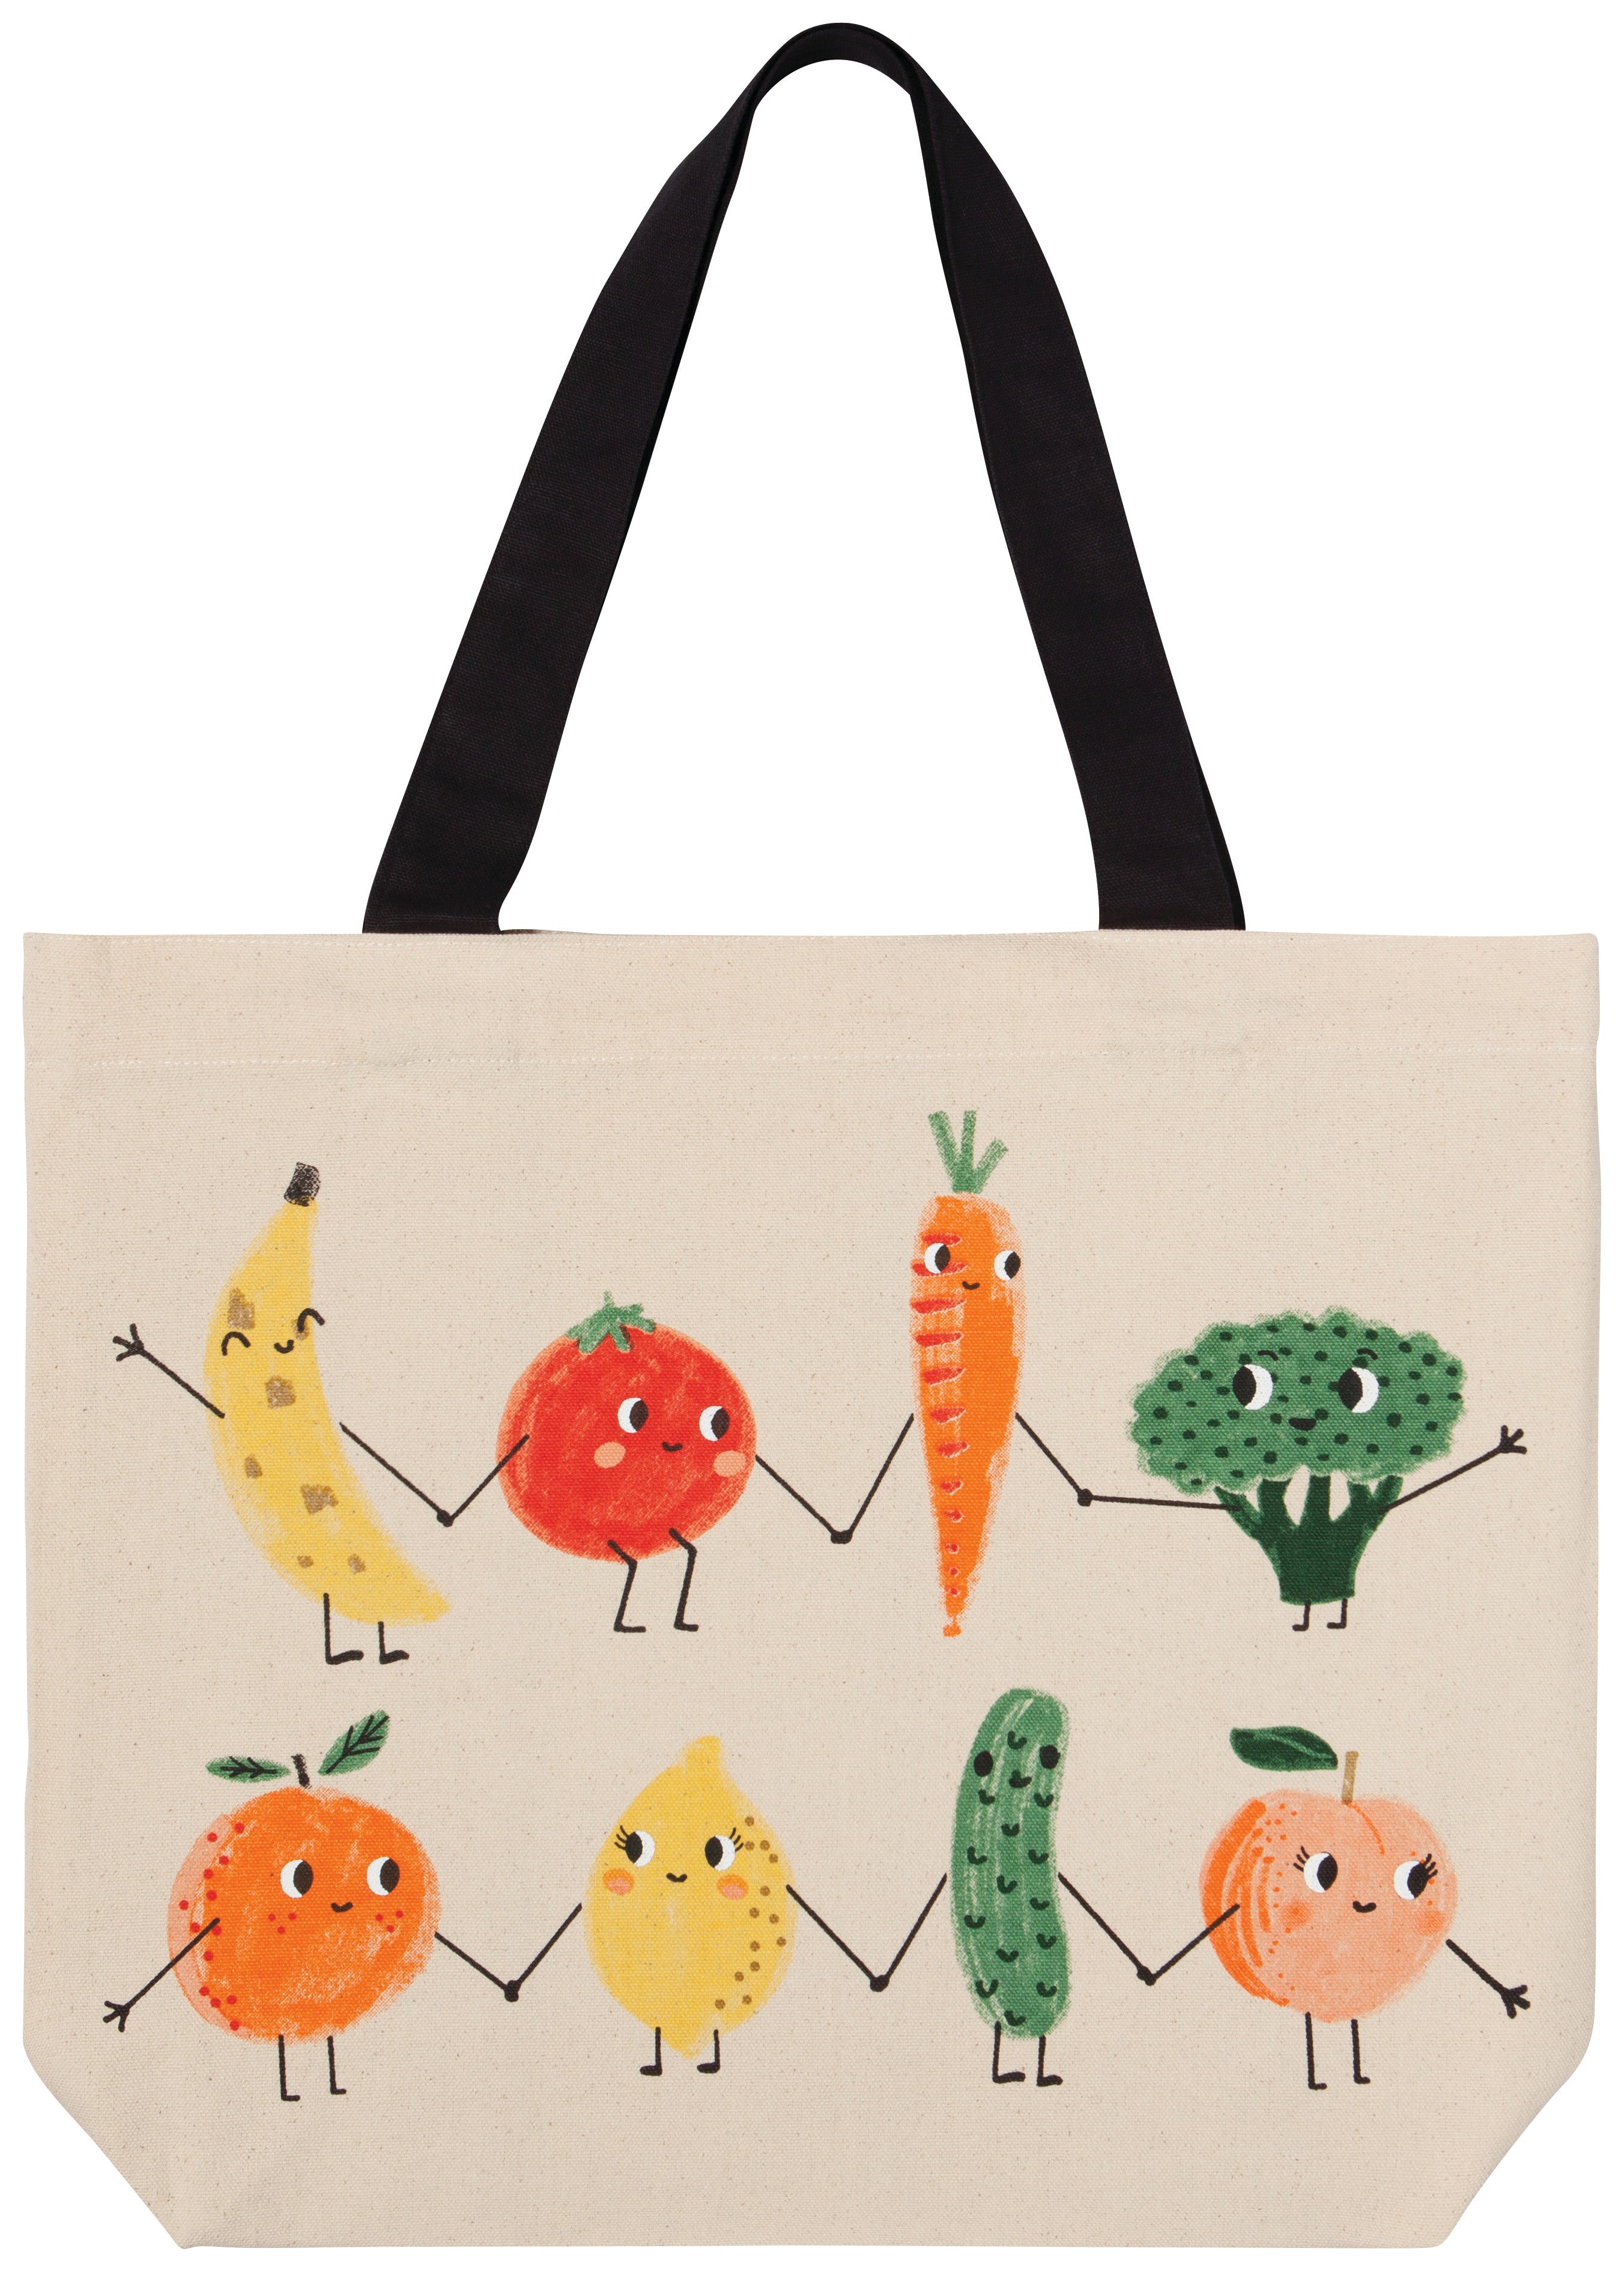 Funny Food Tote Bag | Now Designs - Oscar & Libby's